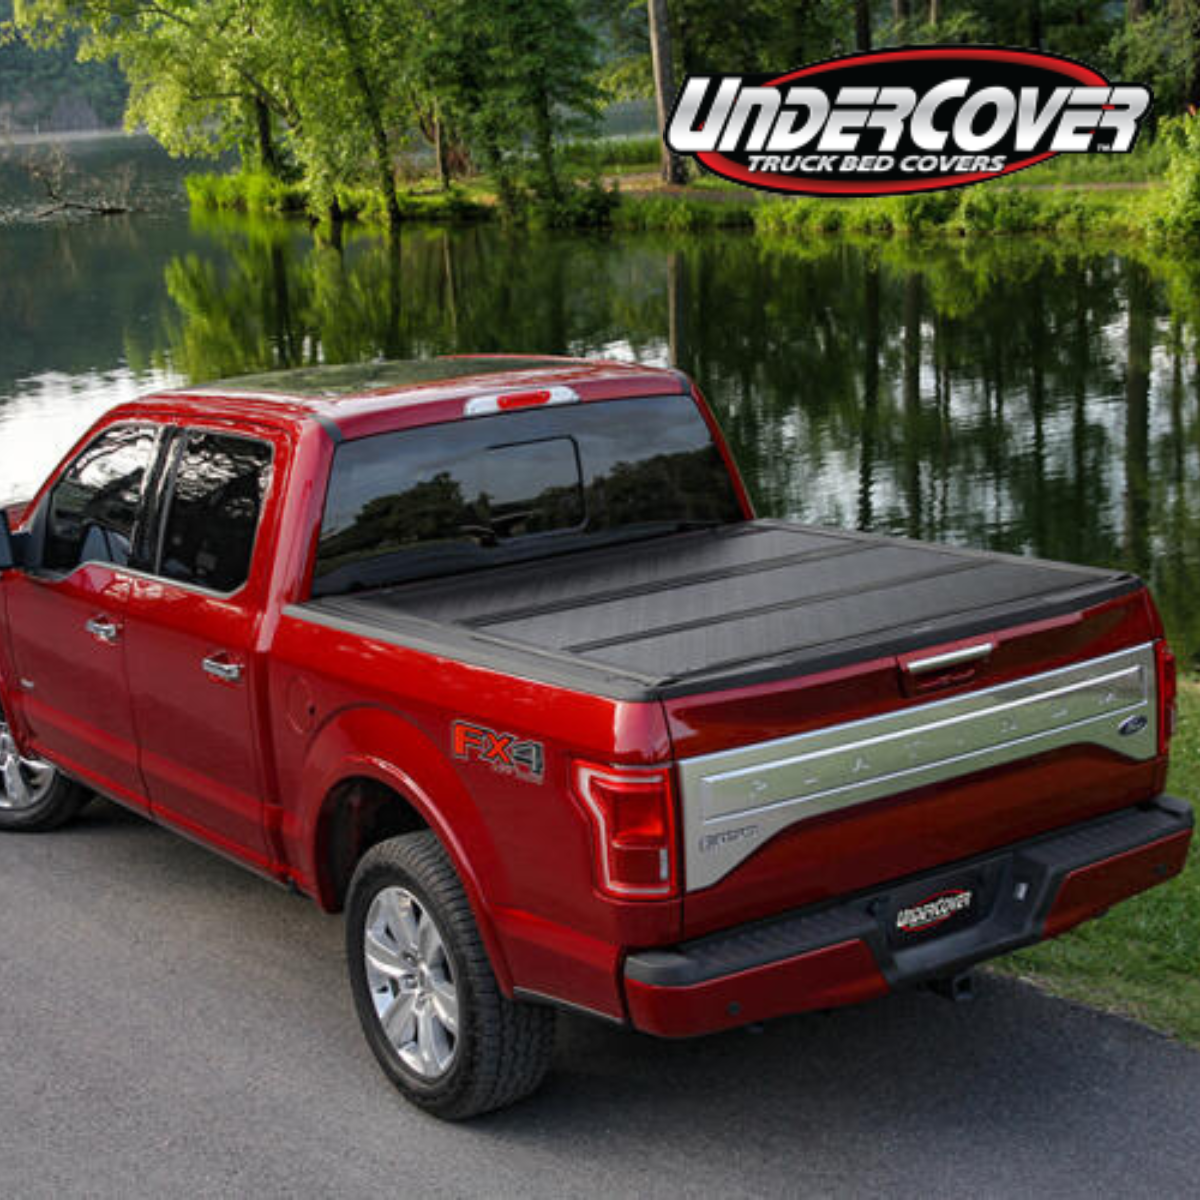 Safeguard your cargo with Undercover’s Flex. The Flex is Undercover’s hard folding truck bed cover that gives you the ultimate control of your truck bed with three secure riding positions. The cover is easy to install or remove with their easy clamp-on design, and it’s mounted flush with your truck's bed rails, making it the most watertight hard folding cover on the market. The Flex is constructed with heavy-duty aluminum panels providing strength and durability. Each Flex hard folding truck bed cover has a bed rail mounting system equipped with rubber seals and drain tubes that carry water away from and out of the bed, keeping your gear dry and secure. Stop in and protect the contents of your truck bed with UnderCover’s Flex hard folding truck bed cover.